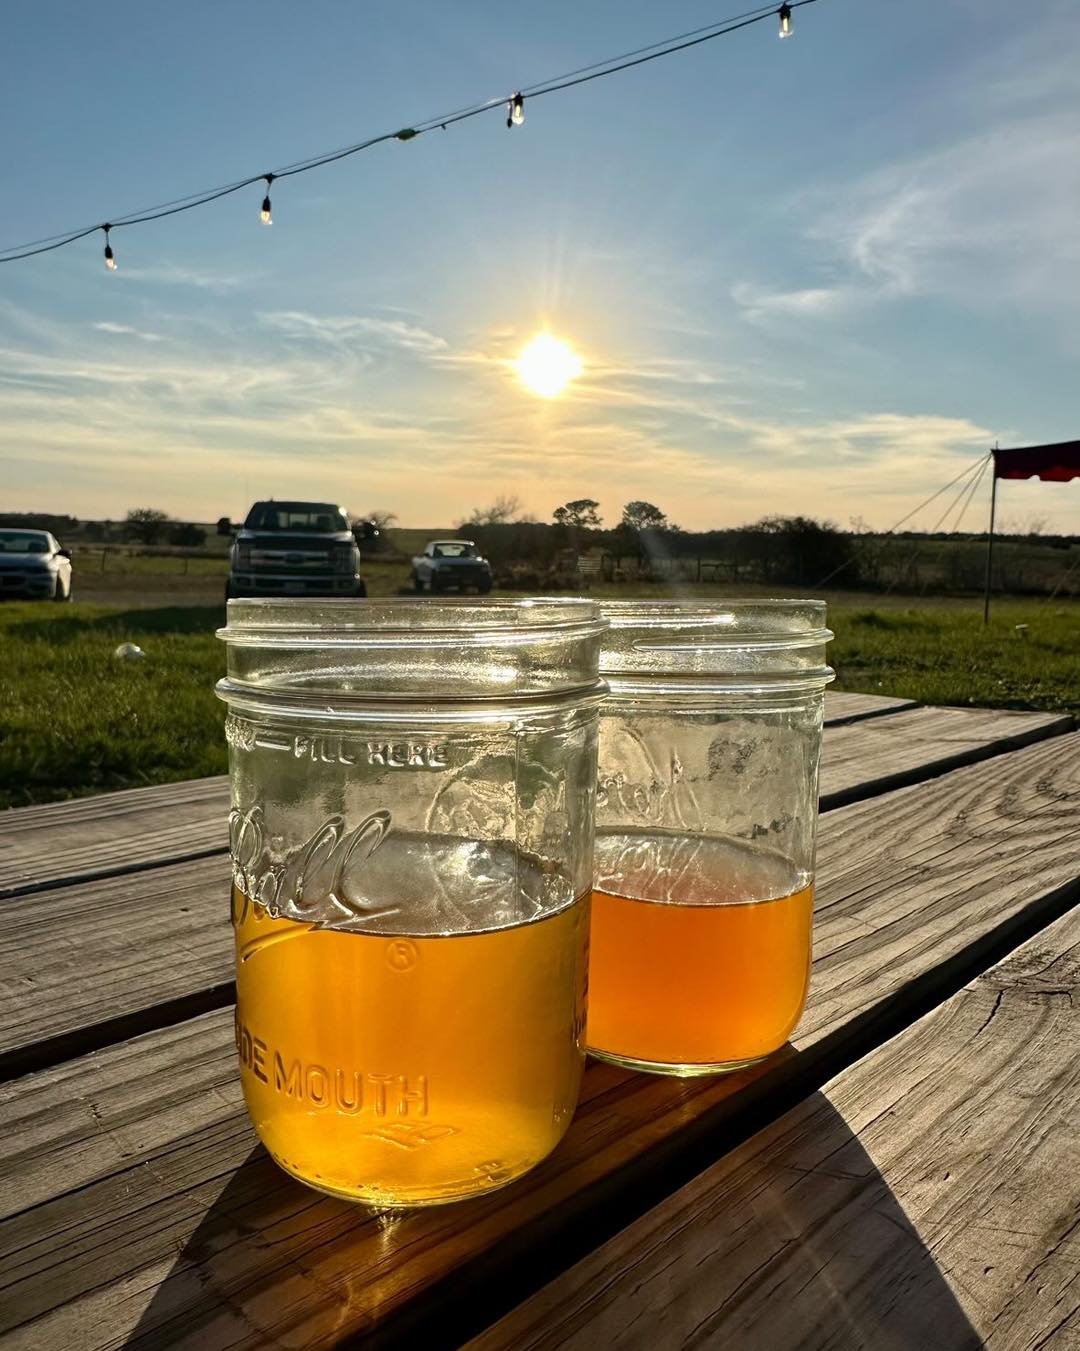 It&rsquo;s Sunday. The Wild Bunch Brewing Company tap room is open today 3-9 pm. Come by and enjoy some pints and some good  food by Margy. 
Come and try the Farmgrass ale. It is light and refreshing for the warmer weather. We also have air condition